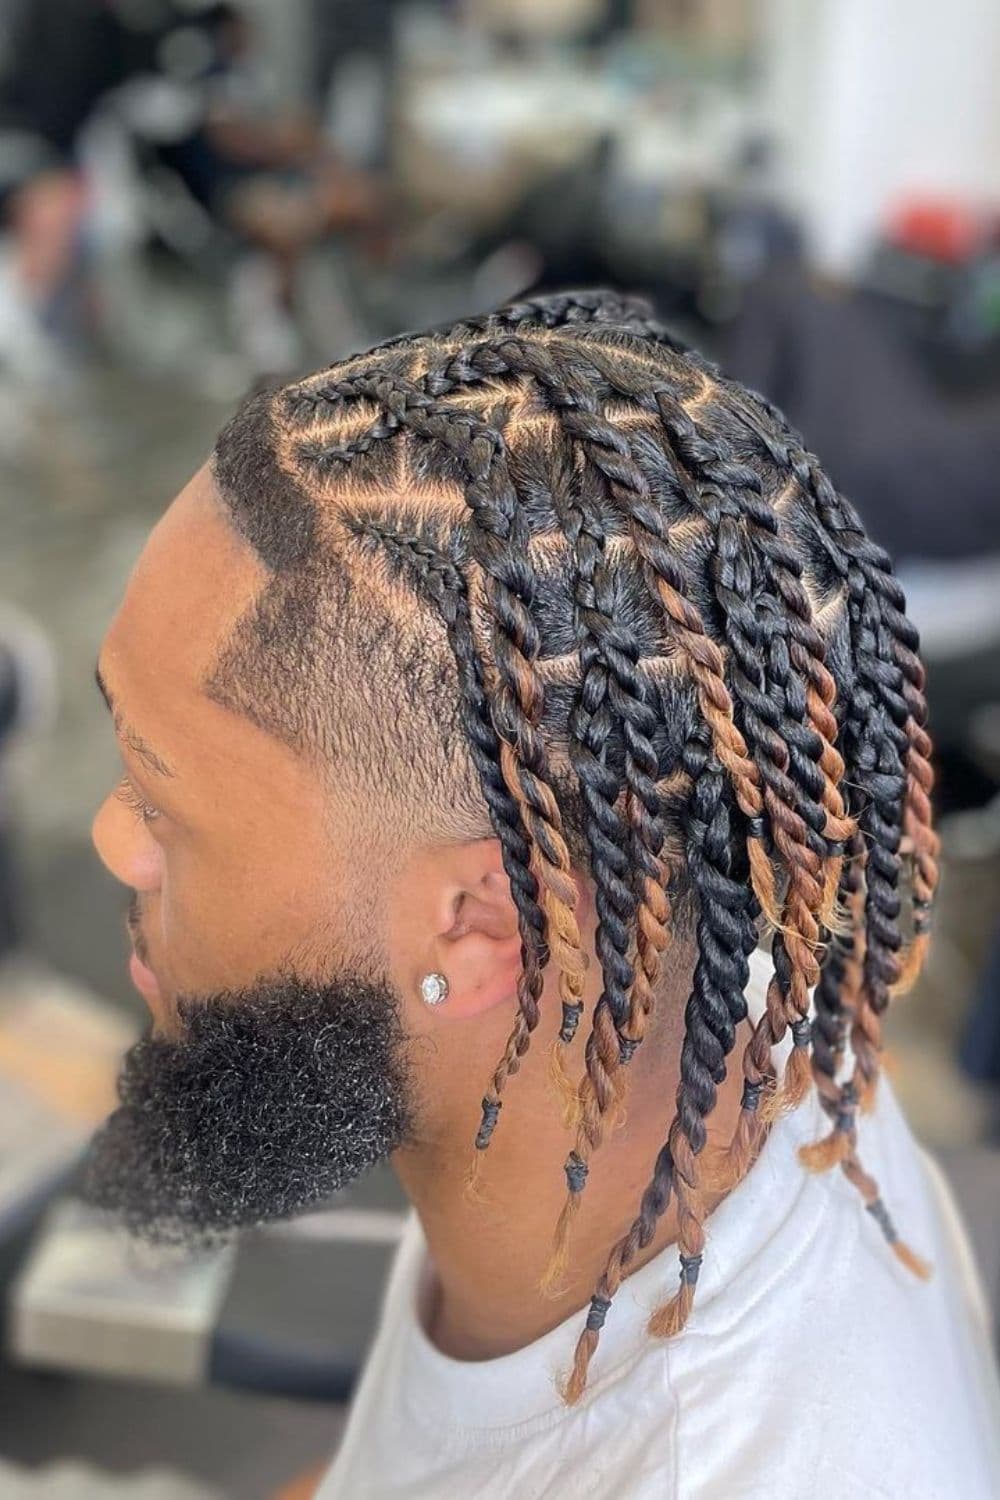 A man with a low-faded twists hairstyle.